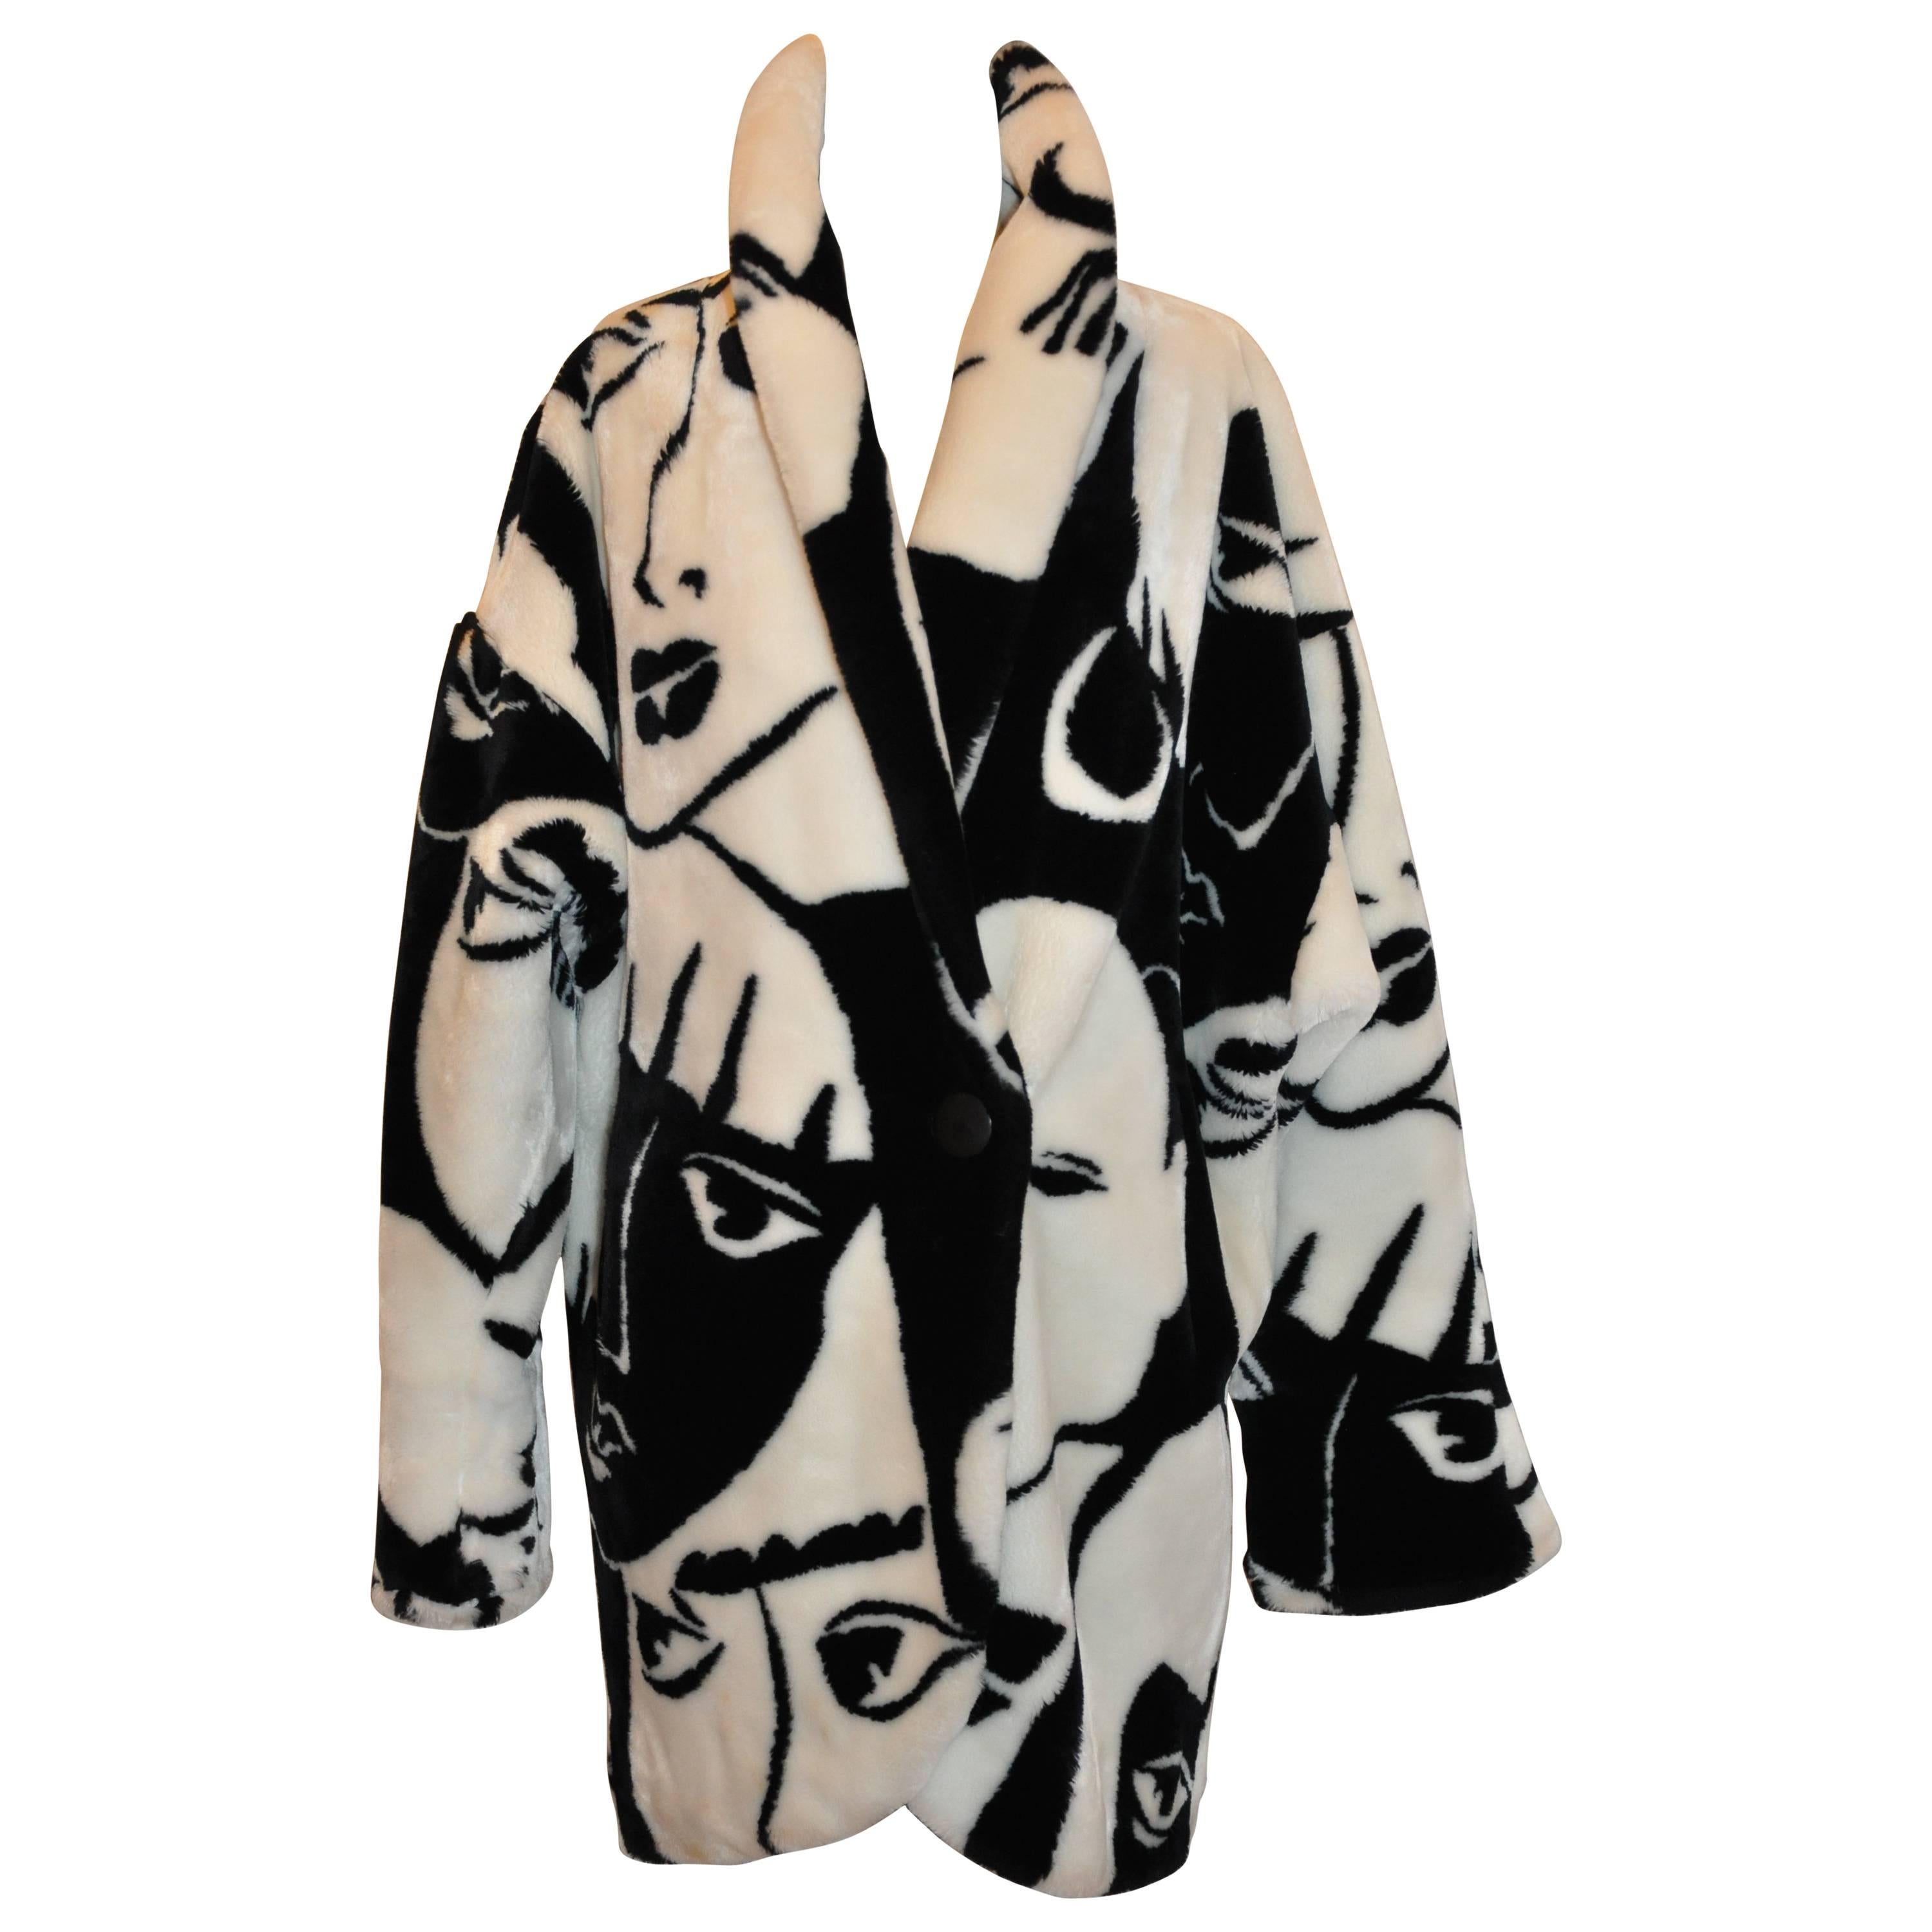 DonnyBrook Bold Black & White Abstract "Faces" Faux Fur Car Coat